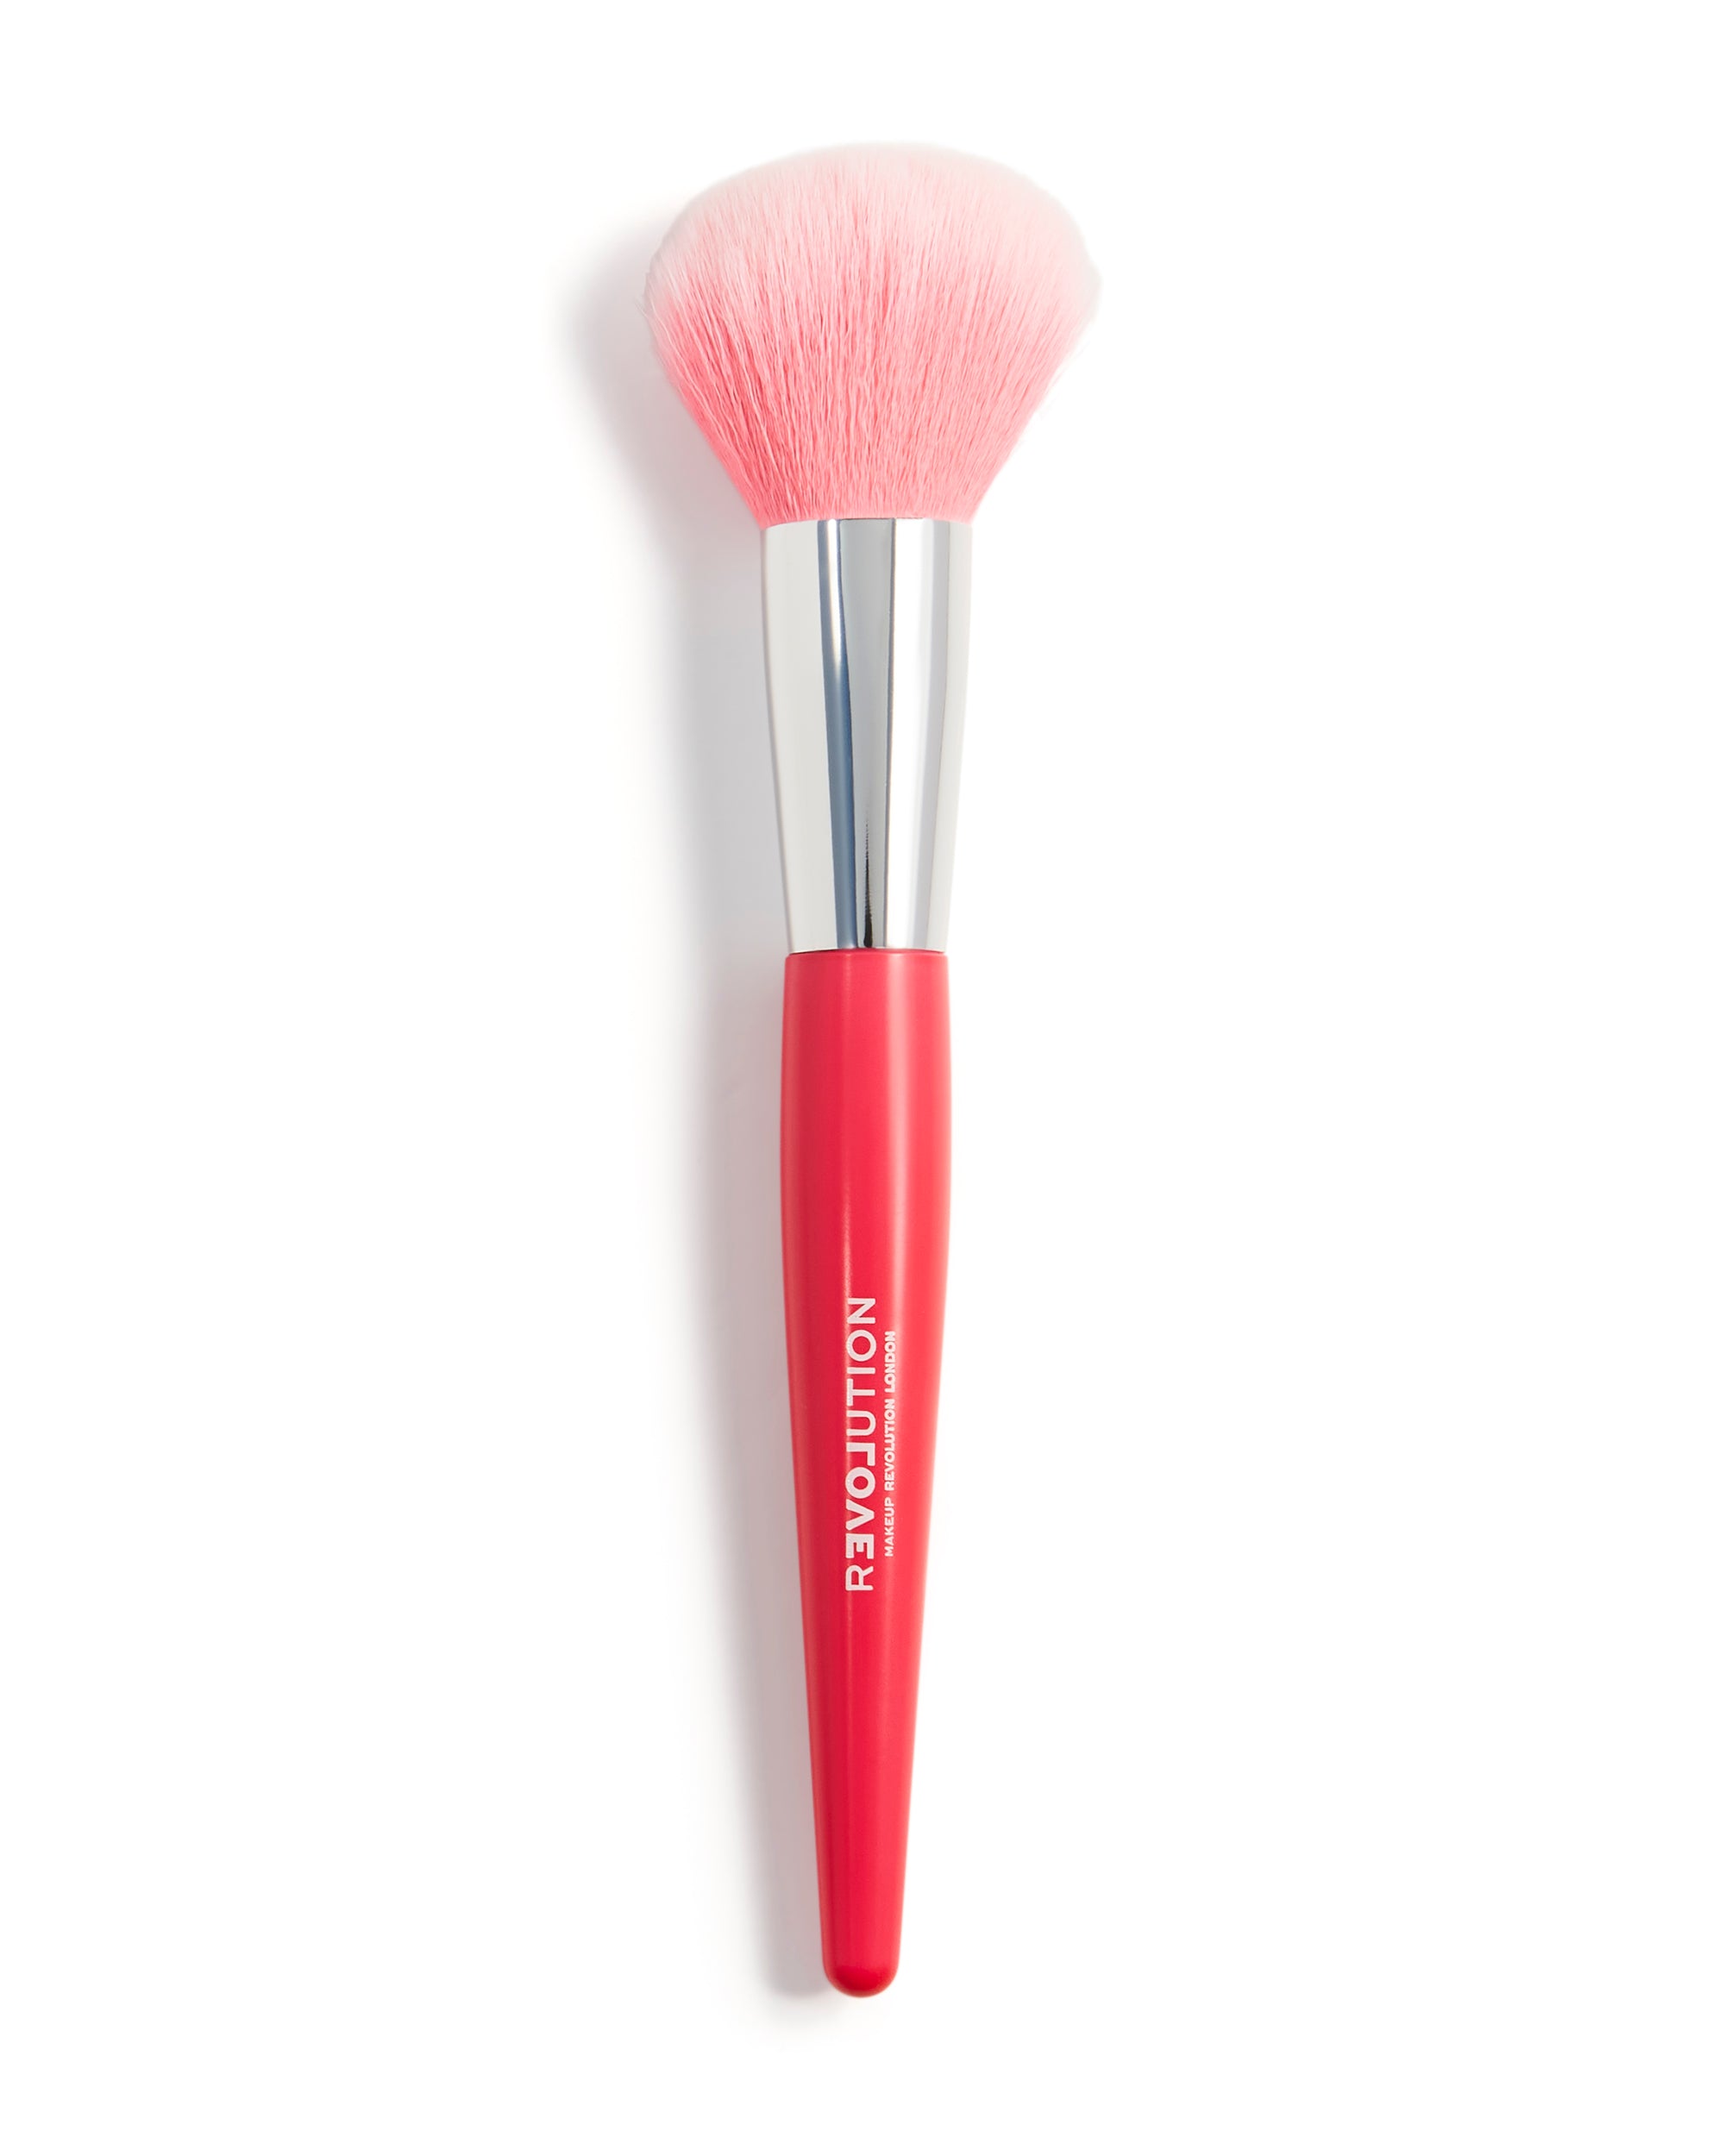 Relove By Revolution Brush Queen Large Powder Brush